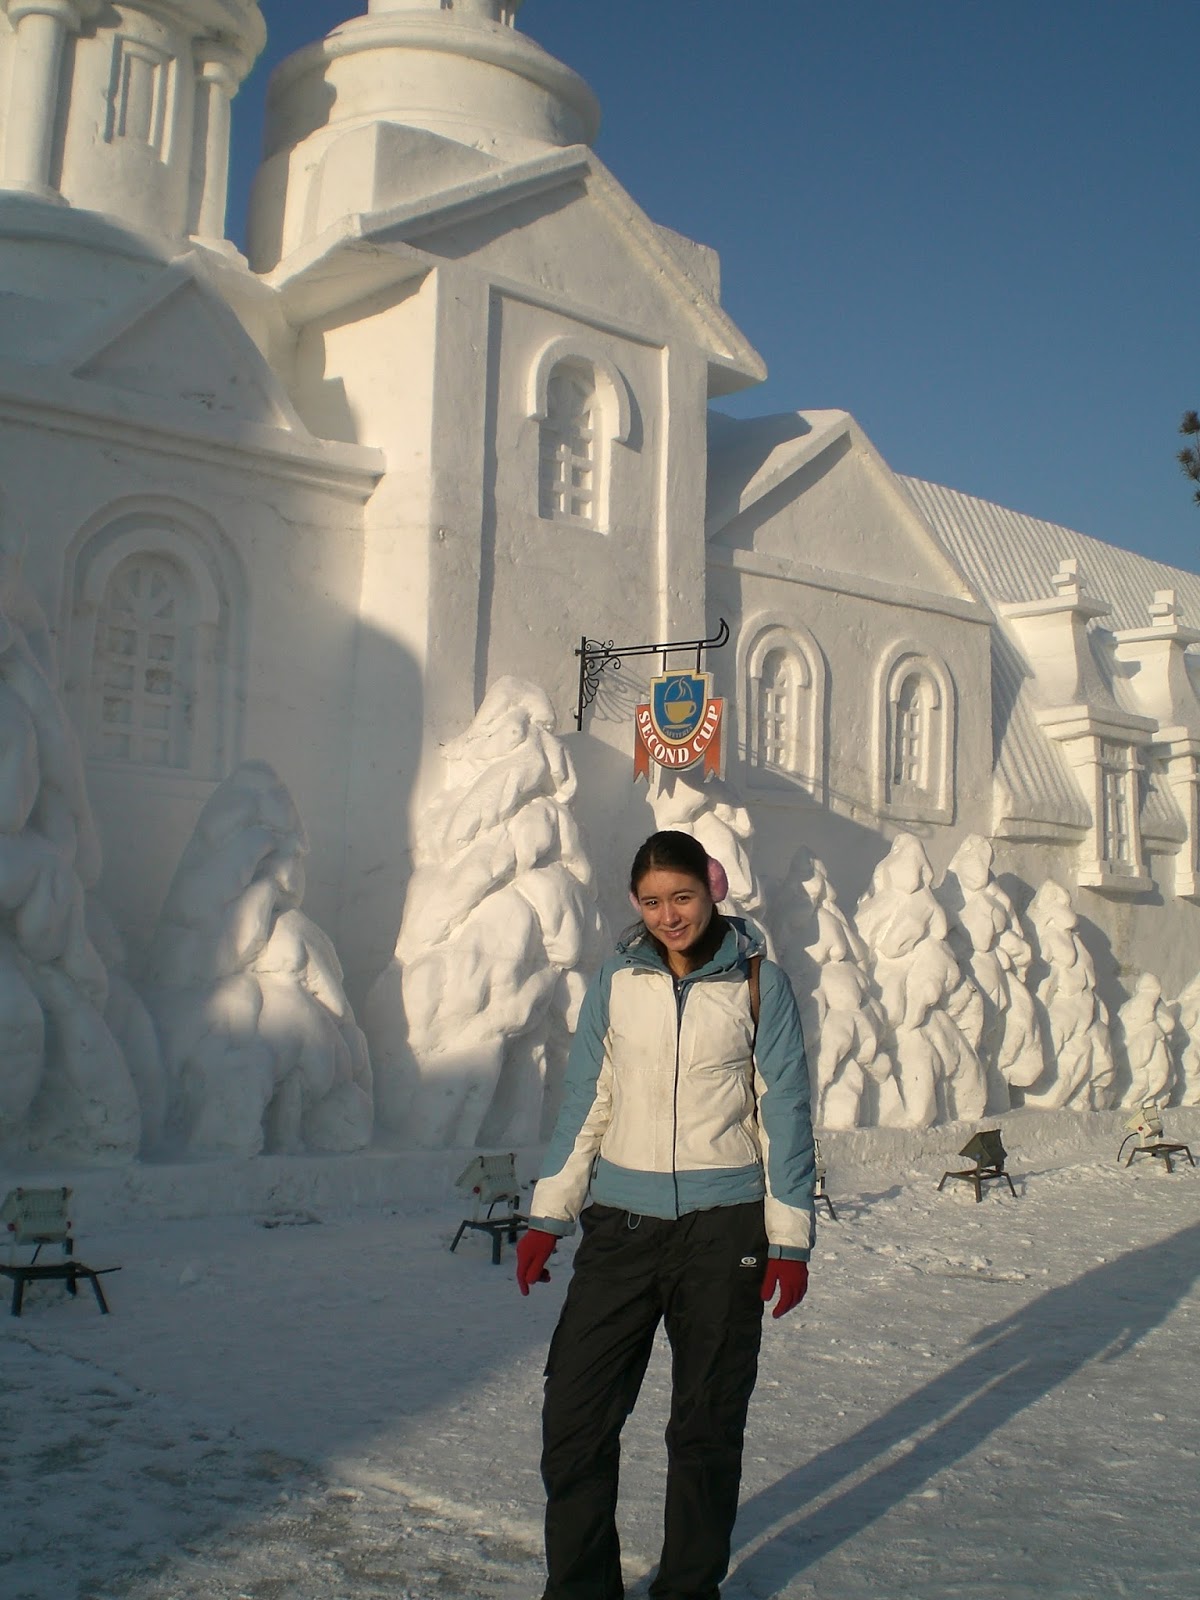 You are currently viewing Harbin Sun Island Snow Festival, China